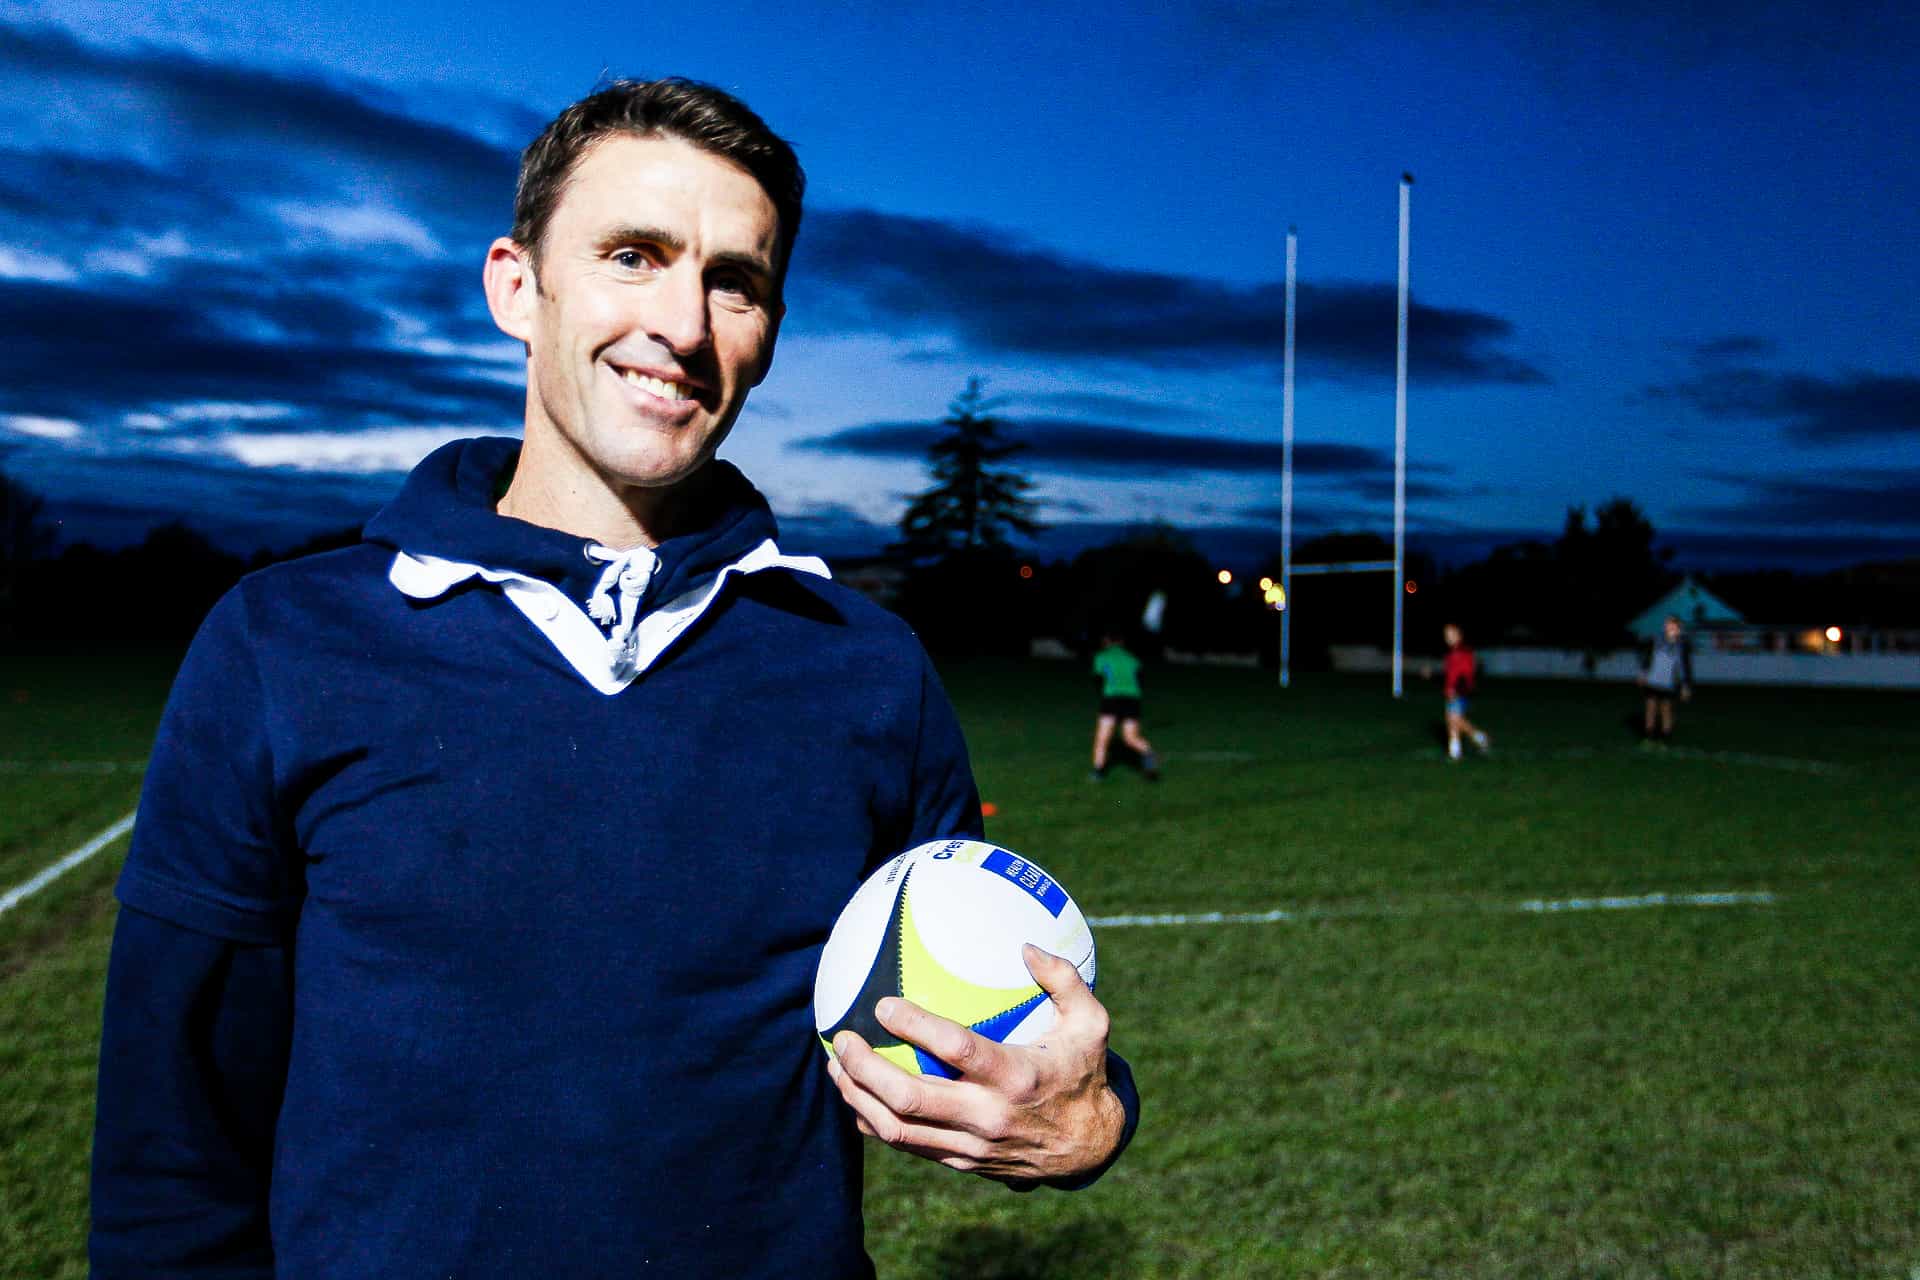 Northland Rugby Announces John Leslie as New Head Coach for the NPC Semco Taniwha Rugby Team